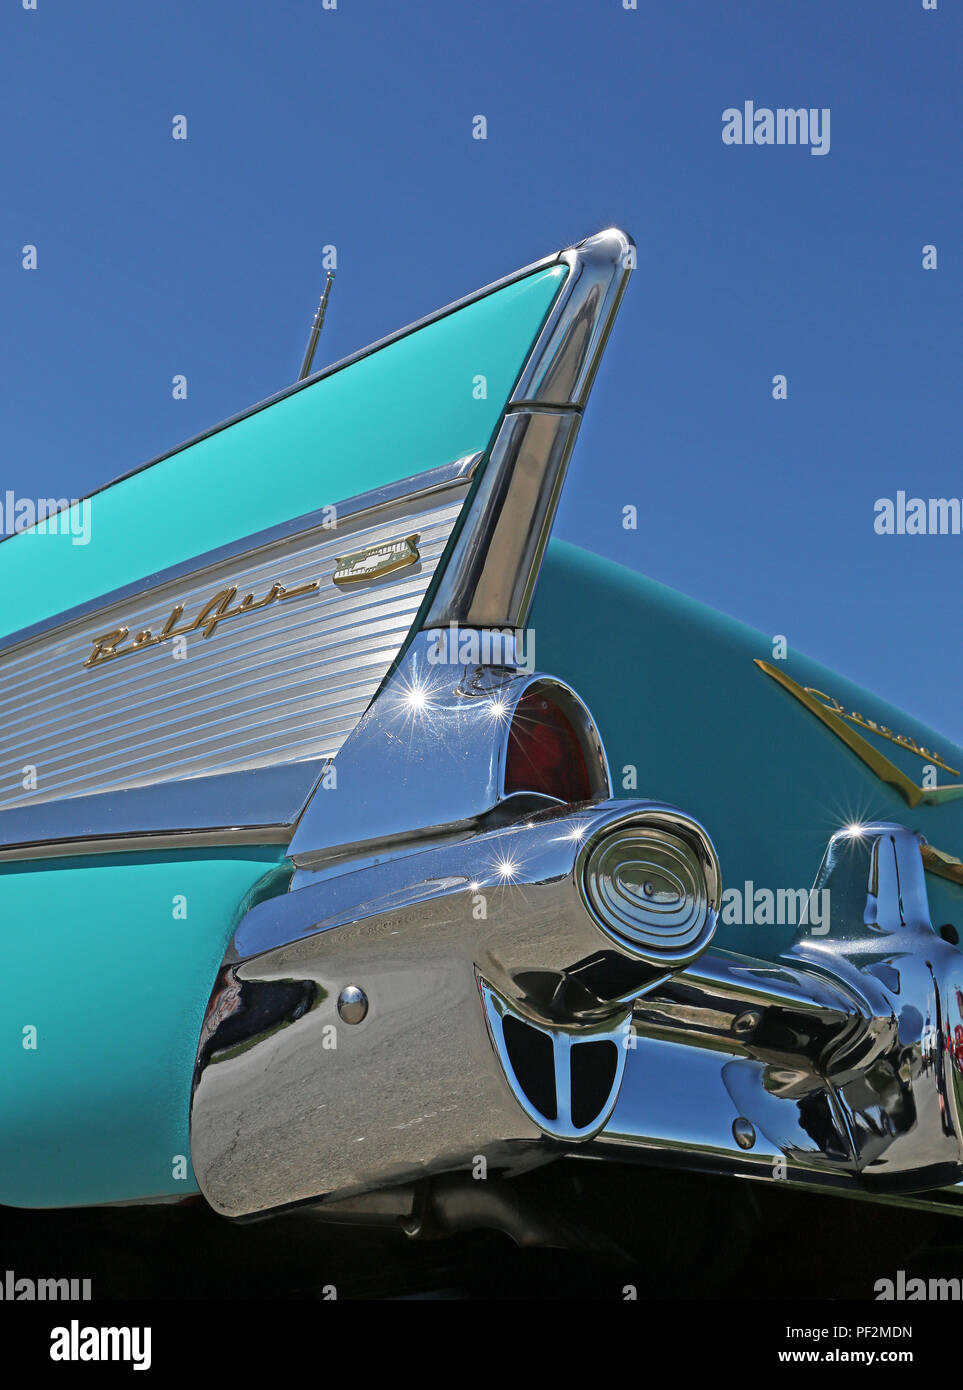 CONCORD, NC - Aprile 8, 2017: UN 1957 Chevy Bel Air automobile sul display in Pennzoil AutoFair classic car show tenutosi a Charlotte Motor Speedway. Foto Stock